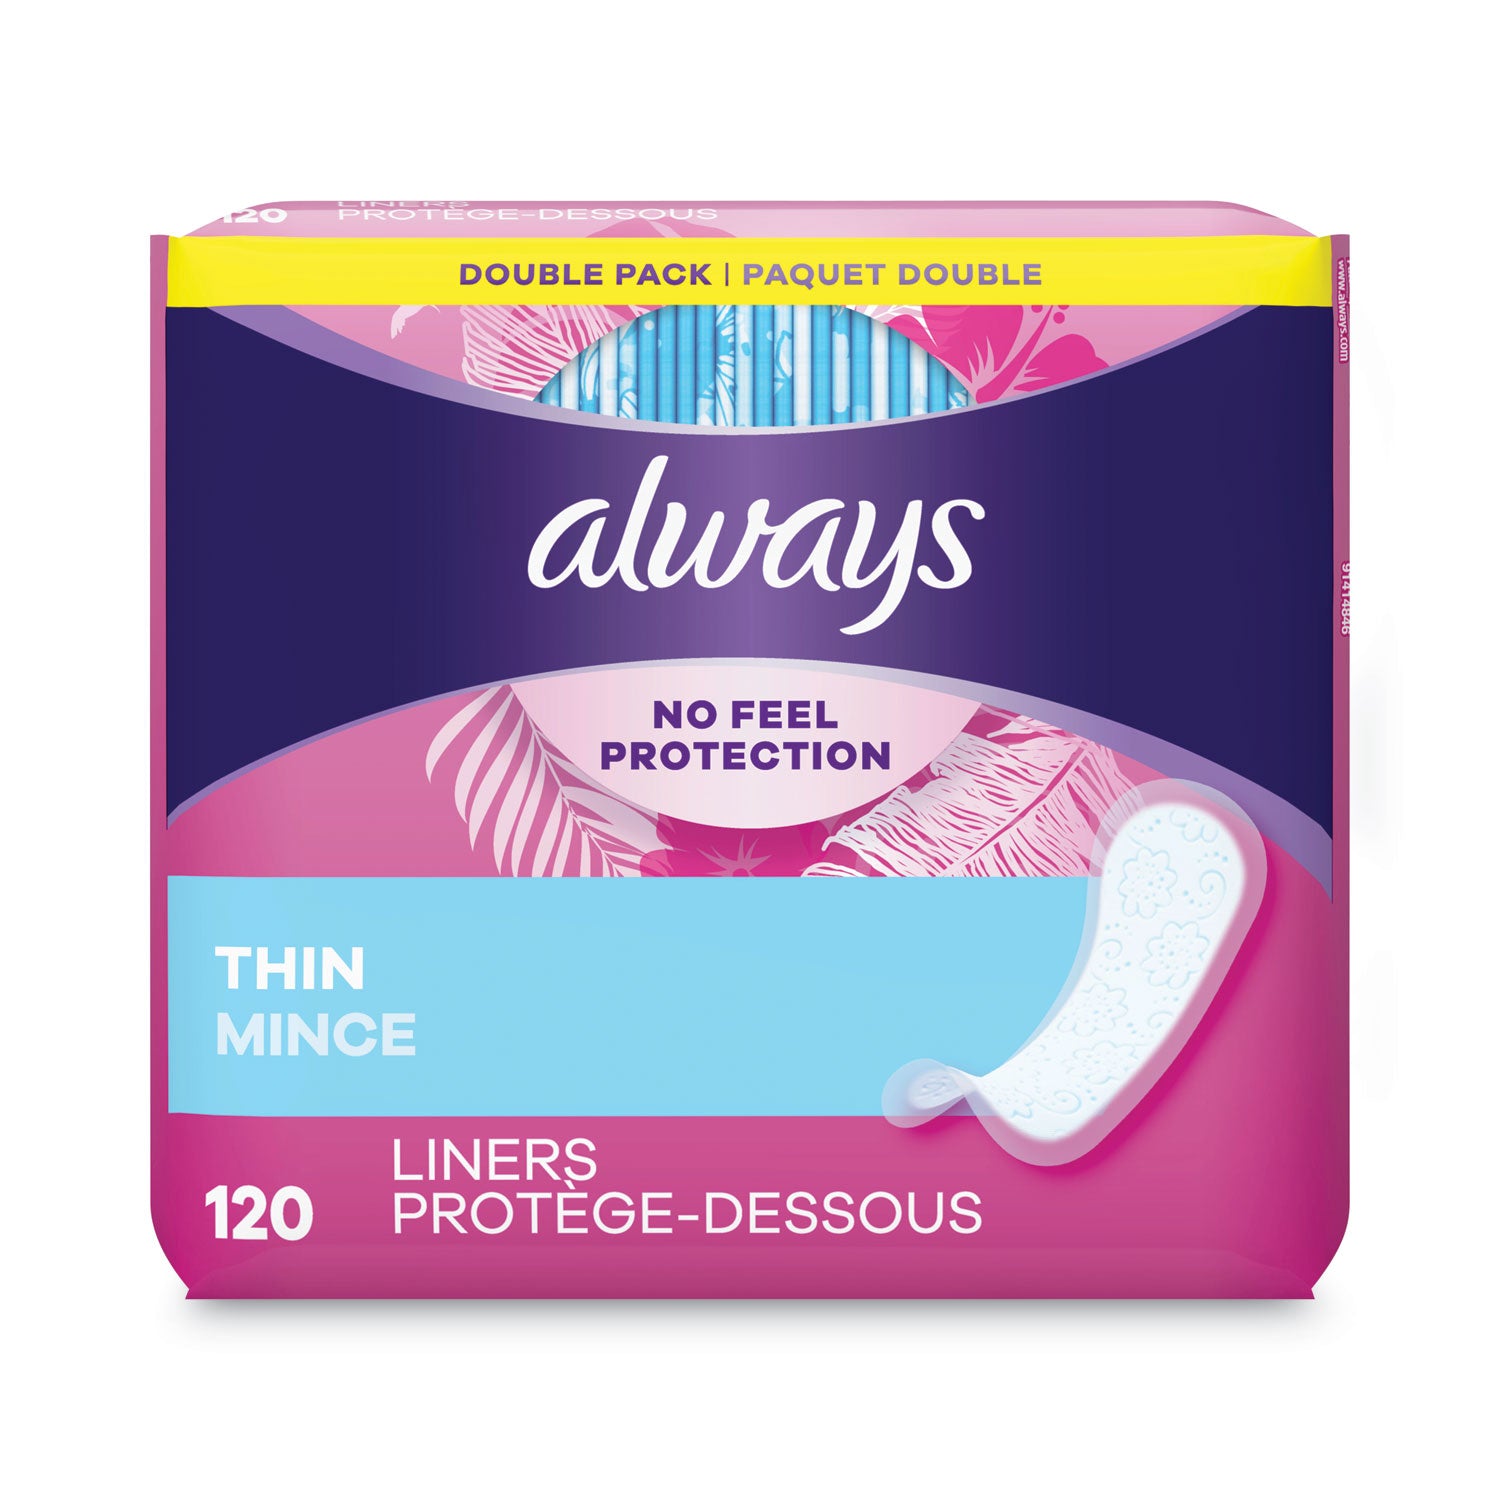 thin-daily-panty-liners-regular-120-pack_pgc10796pk - 1